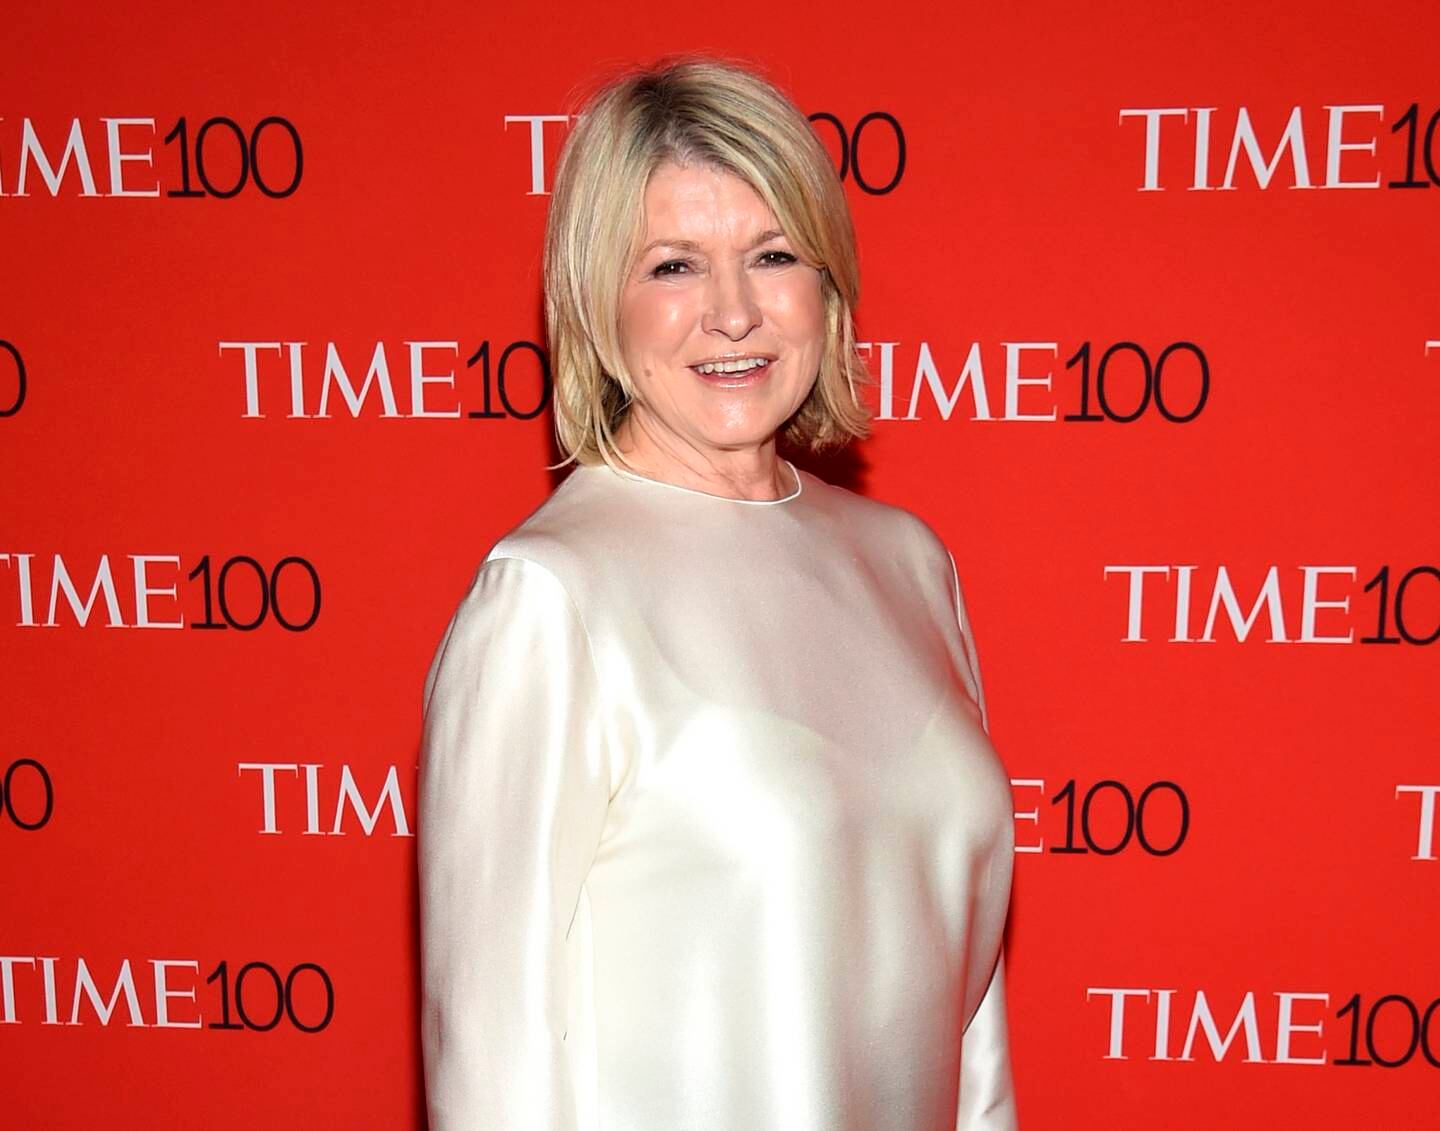 FILE - In this April 24, 2018, file photo, Martha Stewart attends the Time 100 Gala celebrating the 100 most influential people in the world in New York. Stewart posted about her first Uber ride experience on Monday, Nov. 19, including a picture that showed debris on the floor and two water bottles in the vehicle. (Photo by Evan Agostini/Invision/AP, File)